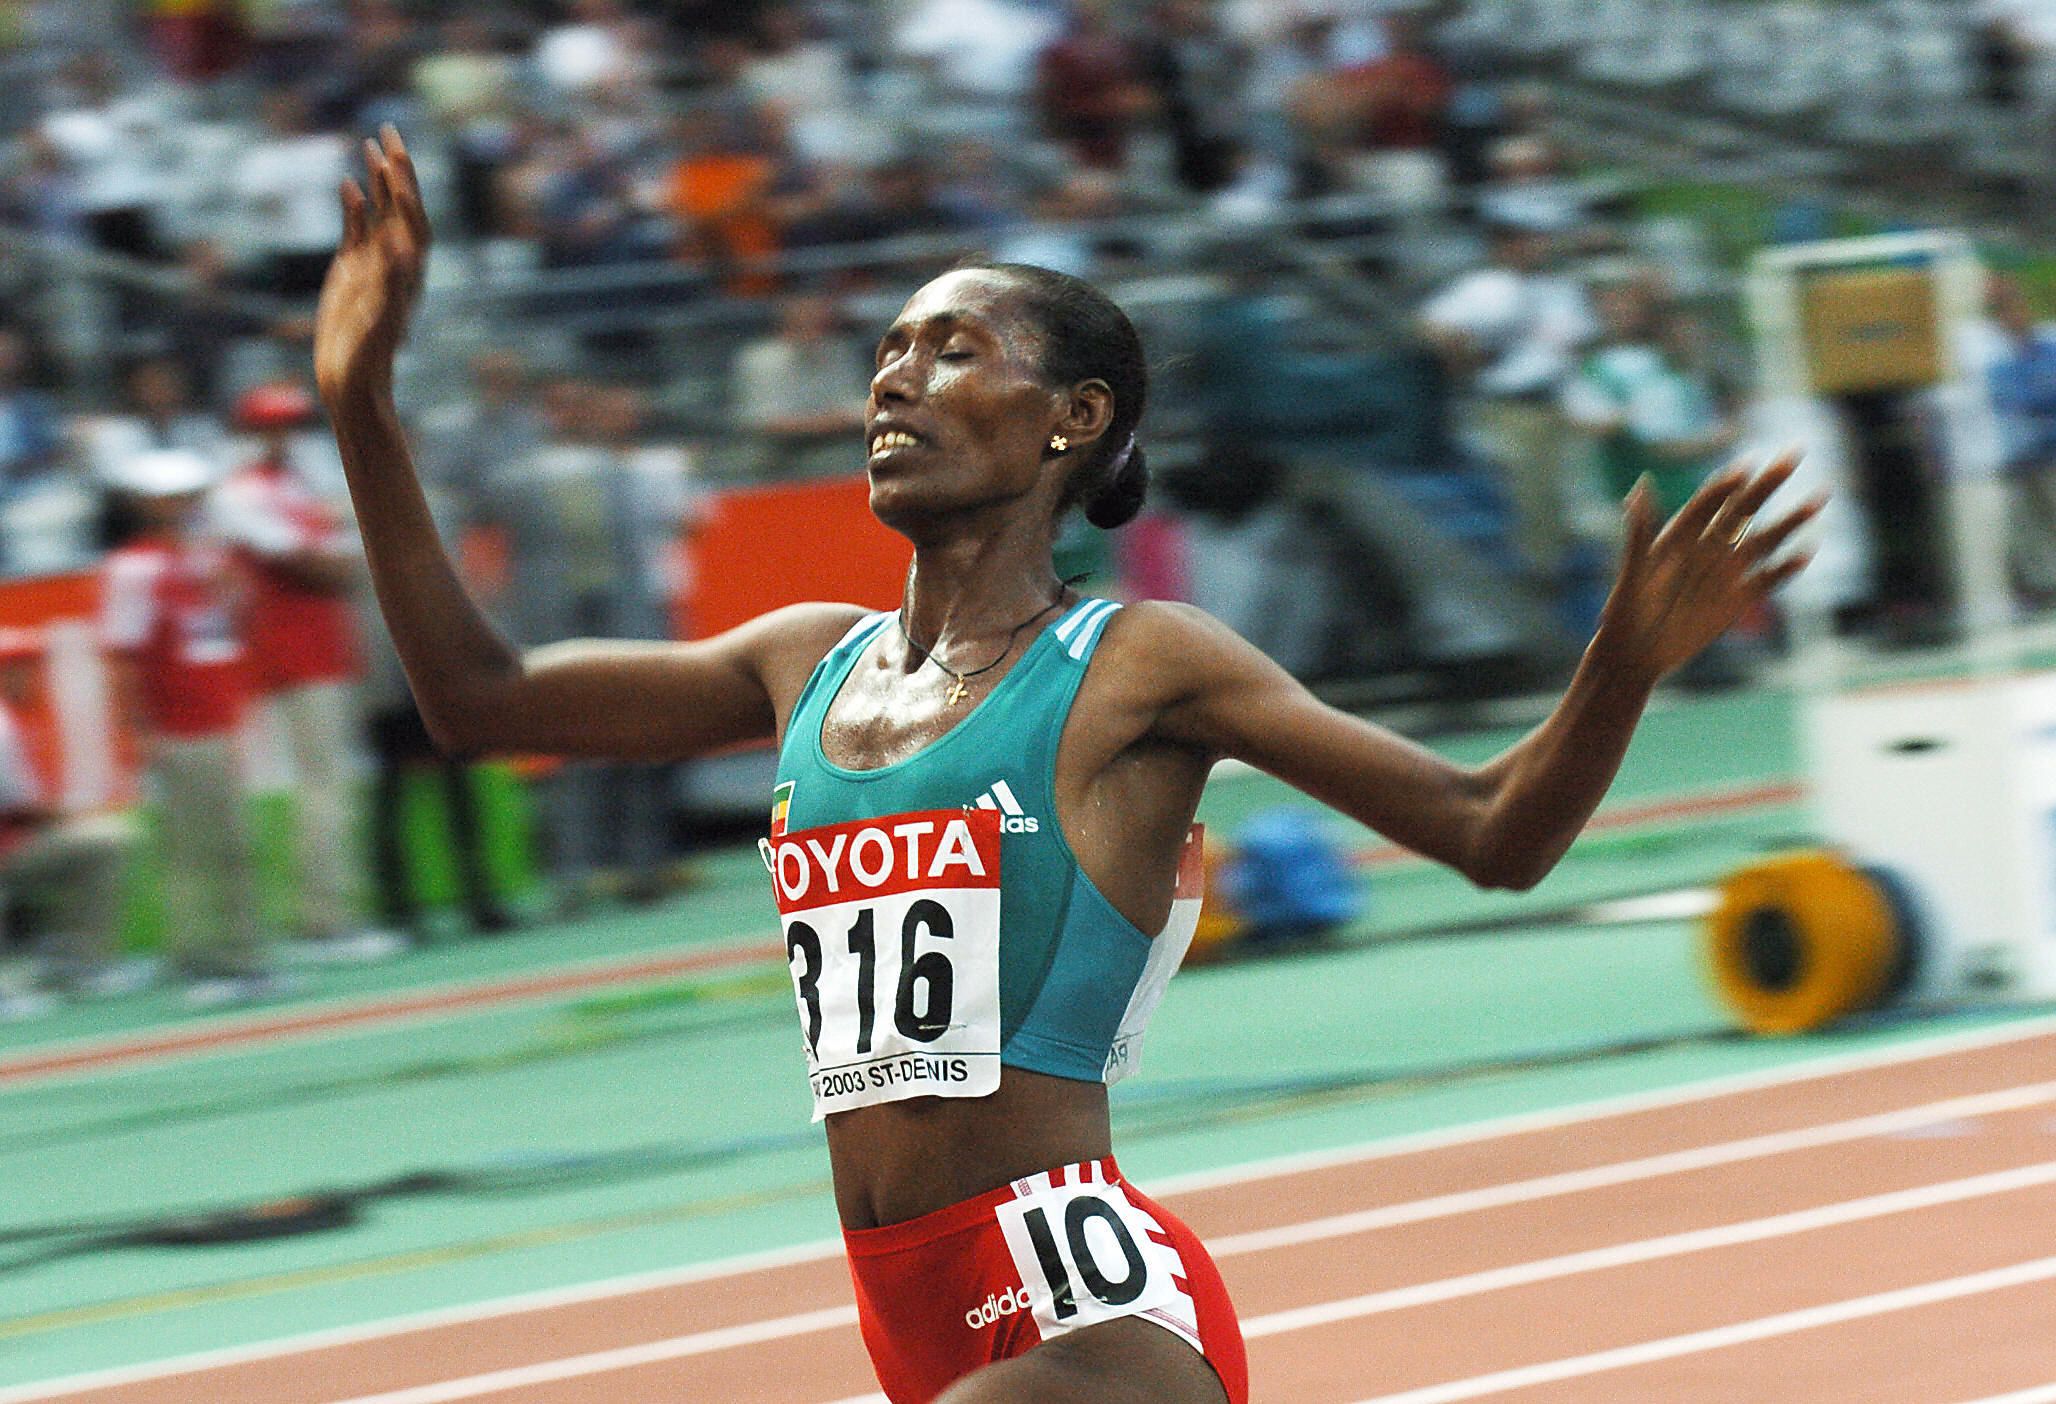 Berhane Adere wins the 2003 world 10,000m title in Paris